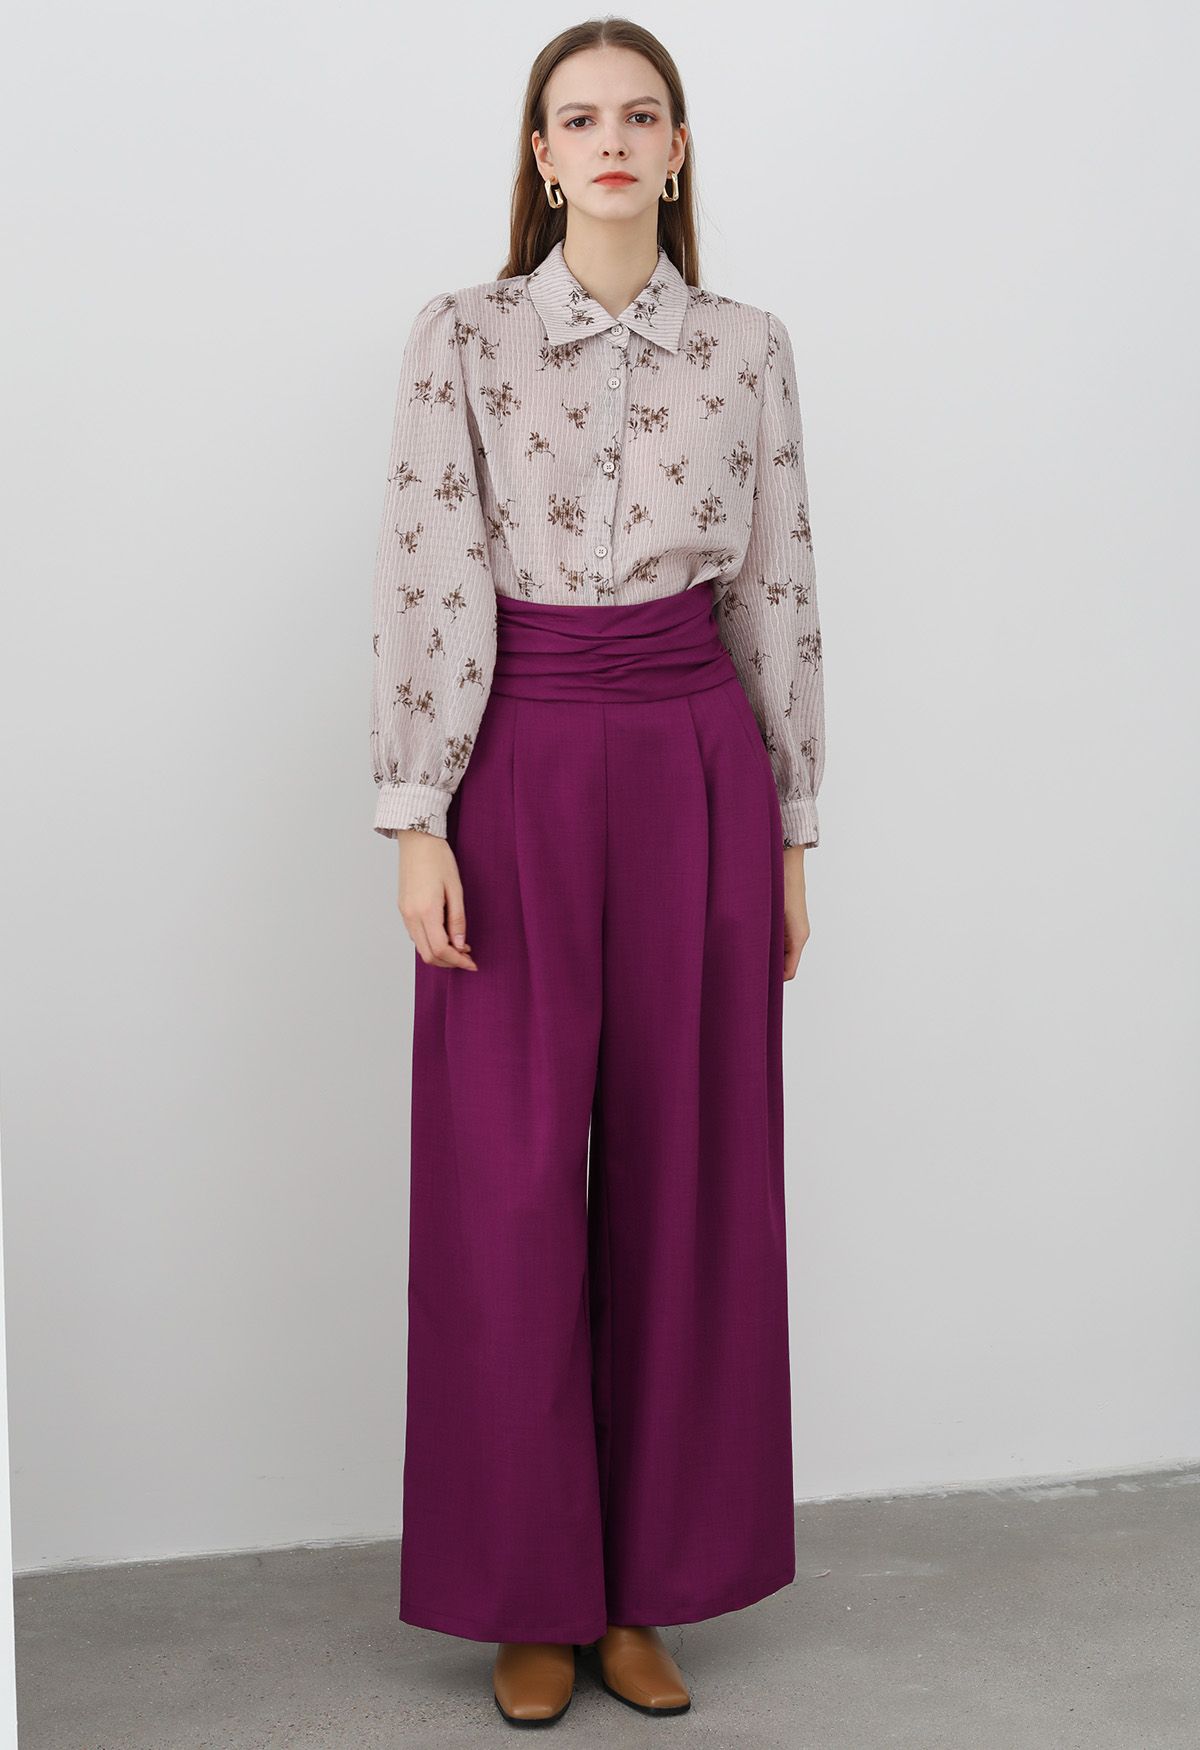 Ruched High Waist Pleated Wide-Leg Pants in Magenta - Retro, Indie